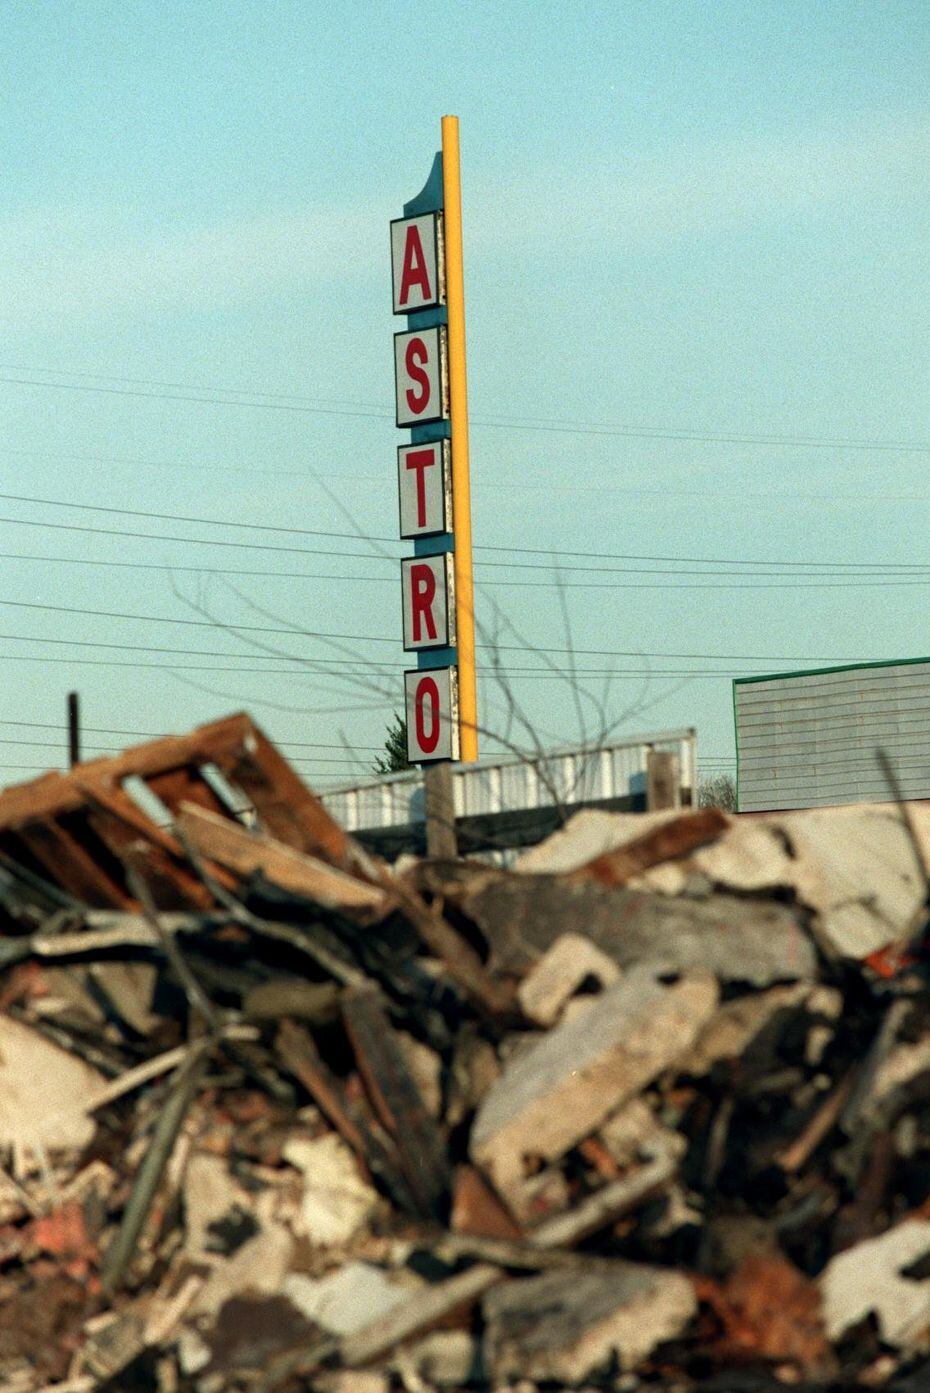 The Astro Drive-In sign towers over rubble  after the old drive-in movie theater was torn...